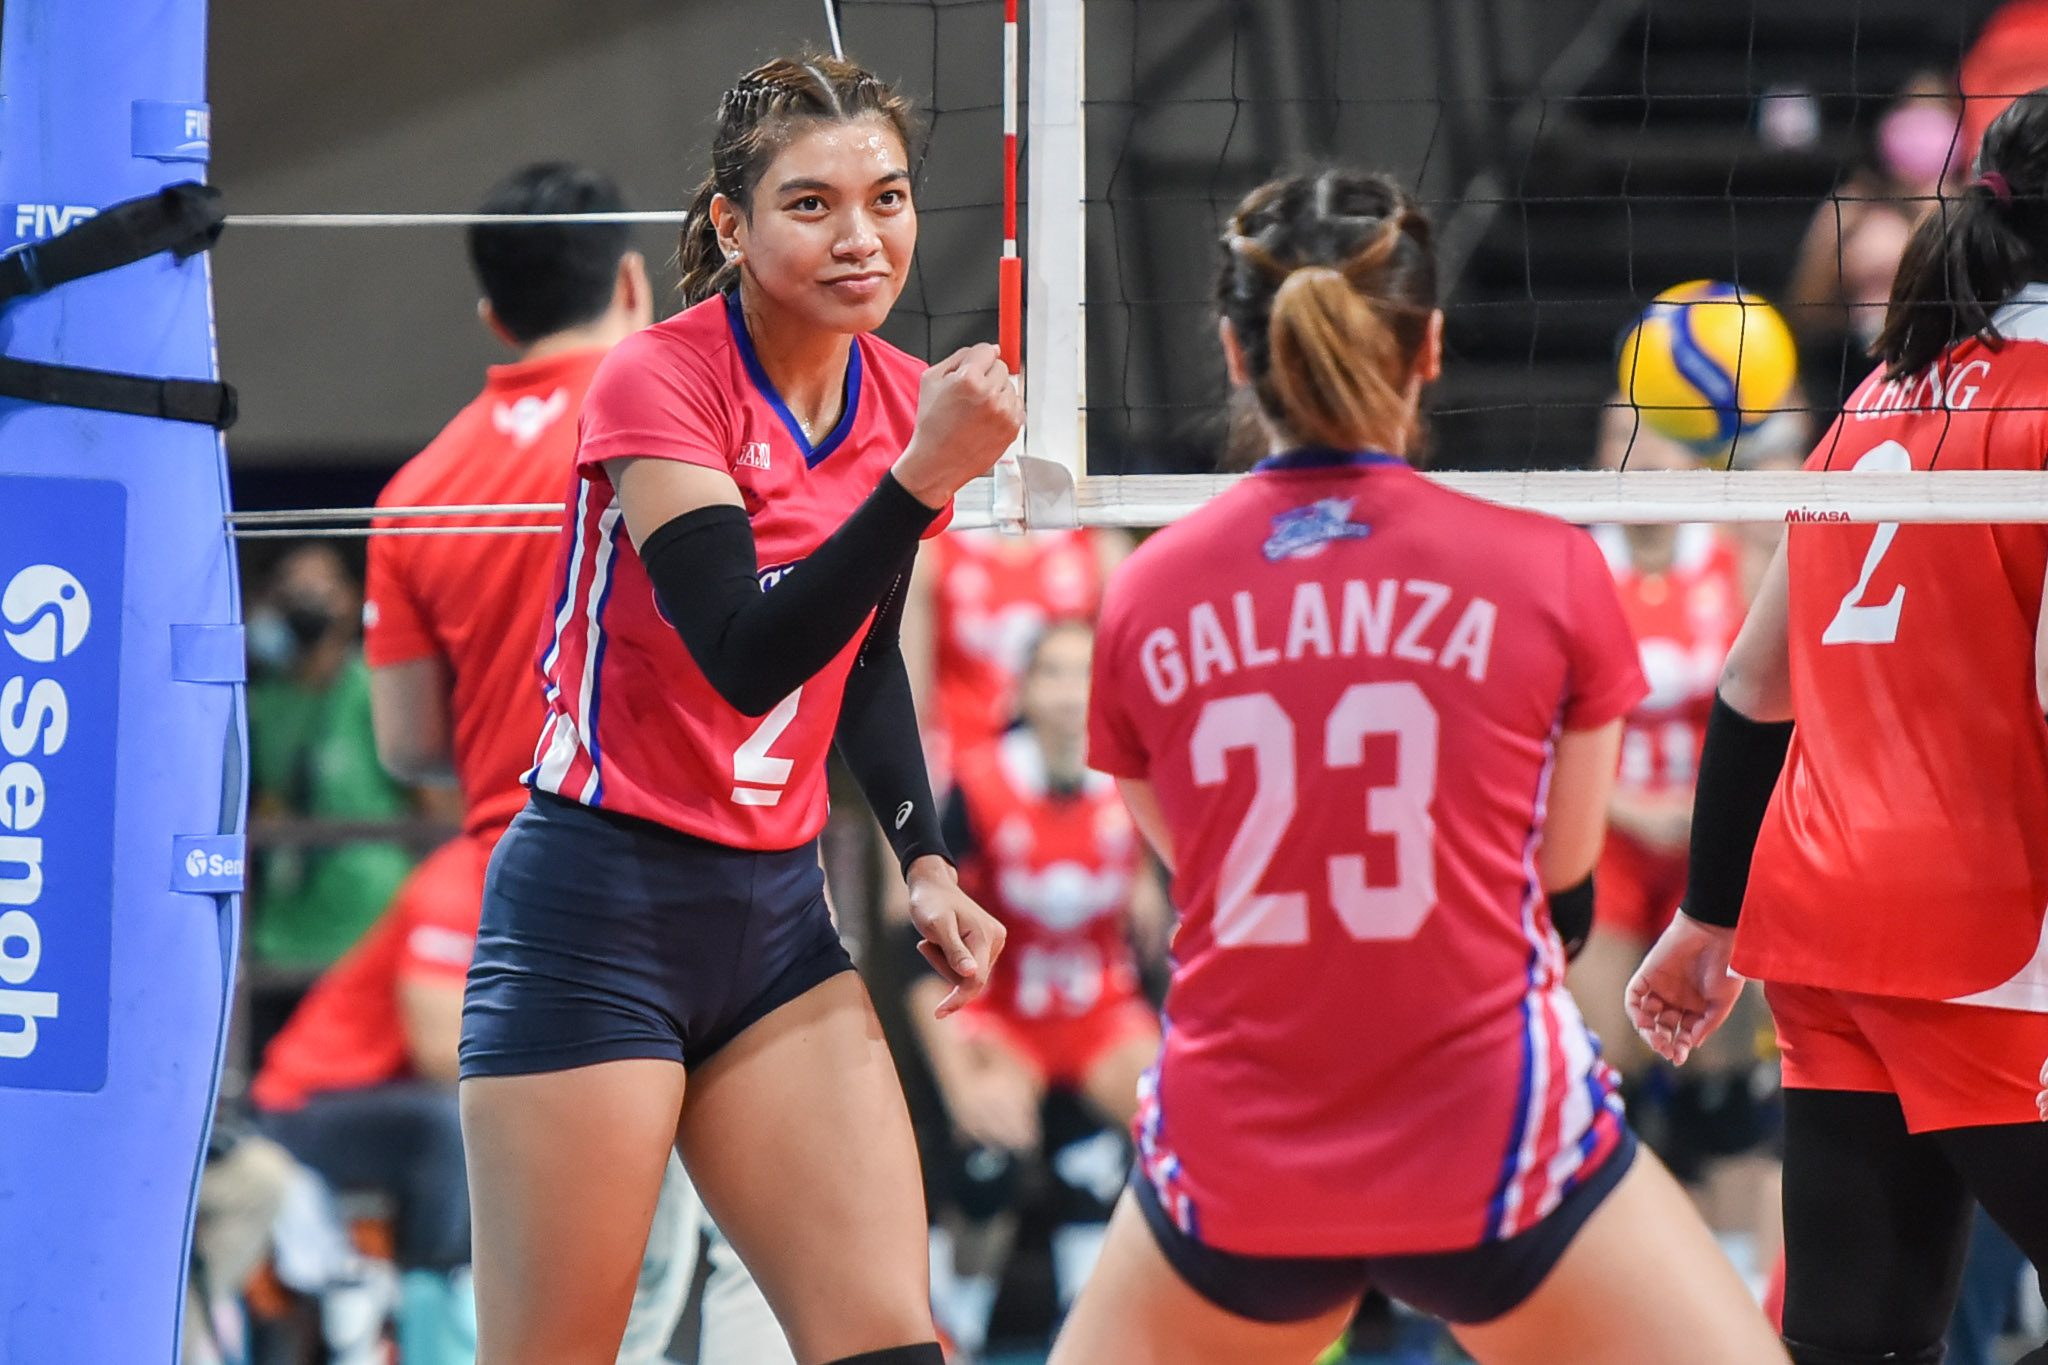 Creamline, Cignal roll to sweeping starts in PVL Reinforced semifinal round